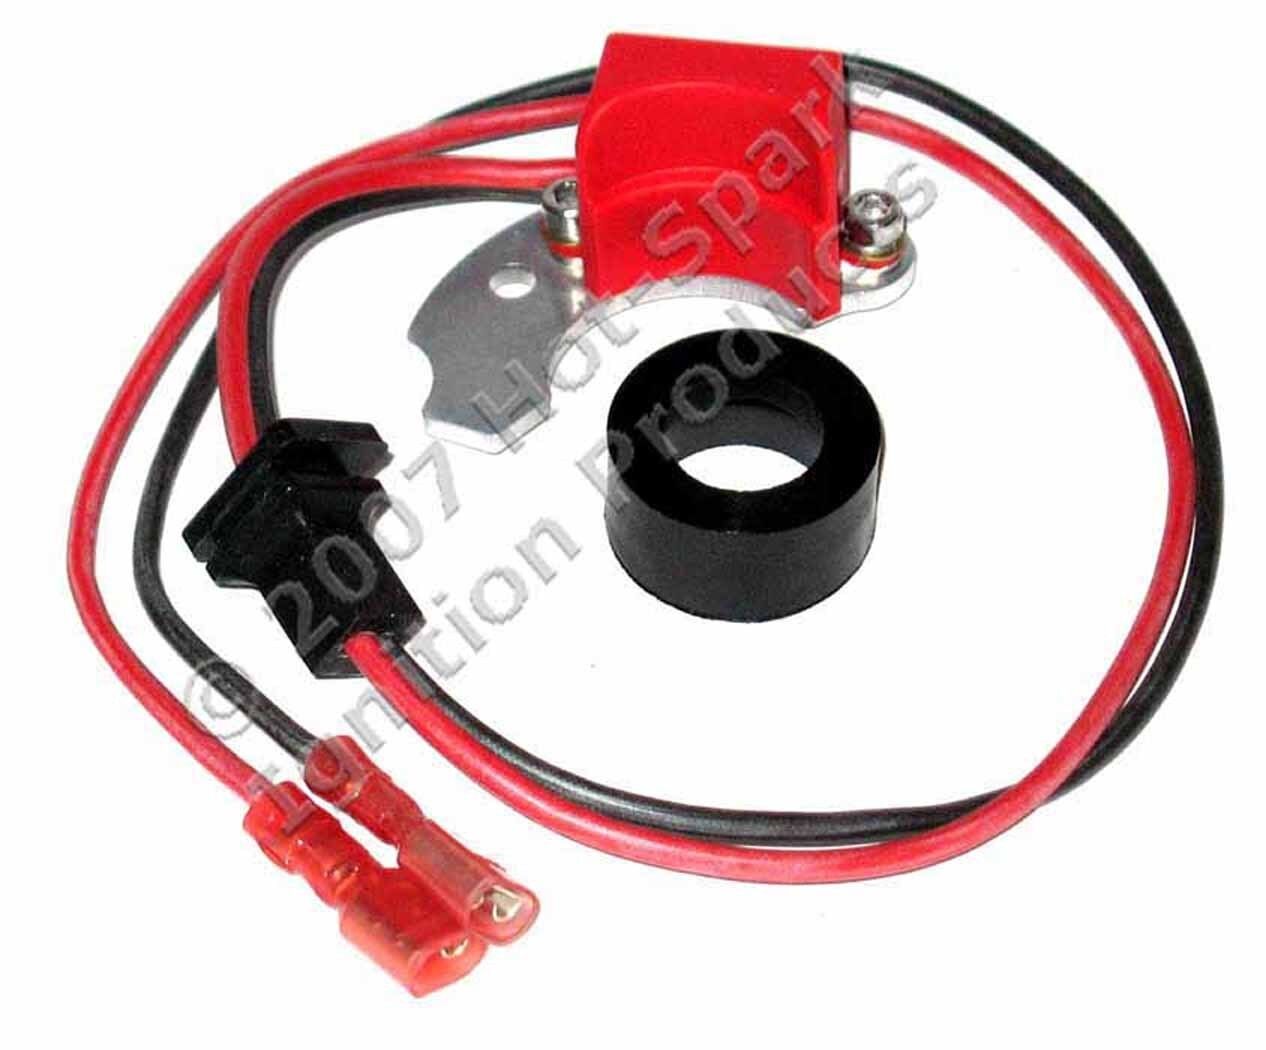 Electronic Ignition Kit for 4-Cyl Ford Pinto 2.0 w/ Bosch Distributor - 3BOS4U1